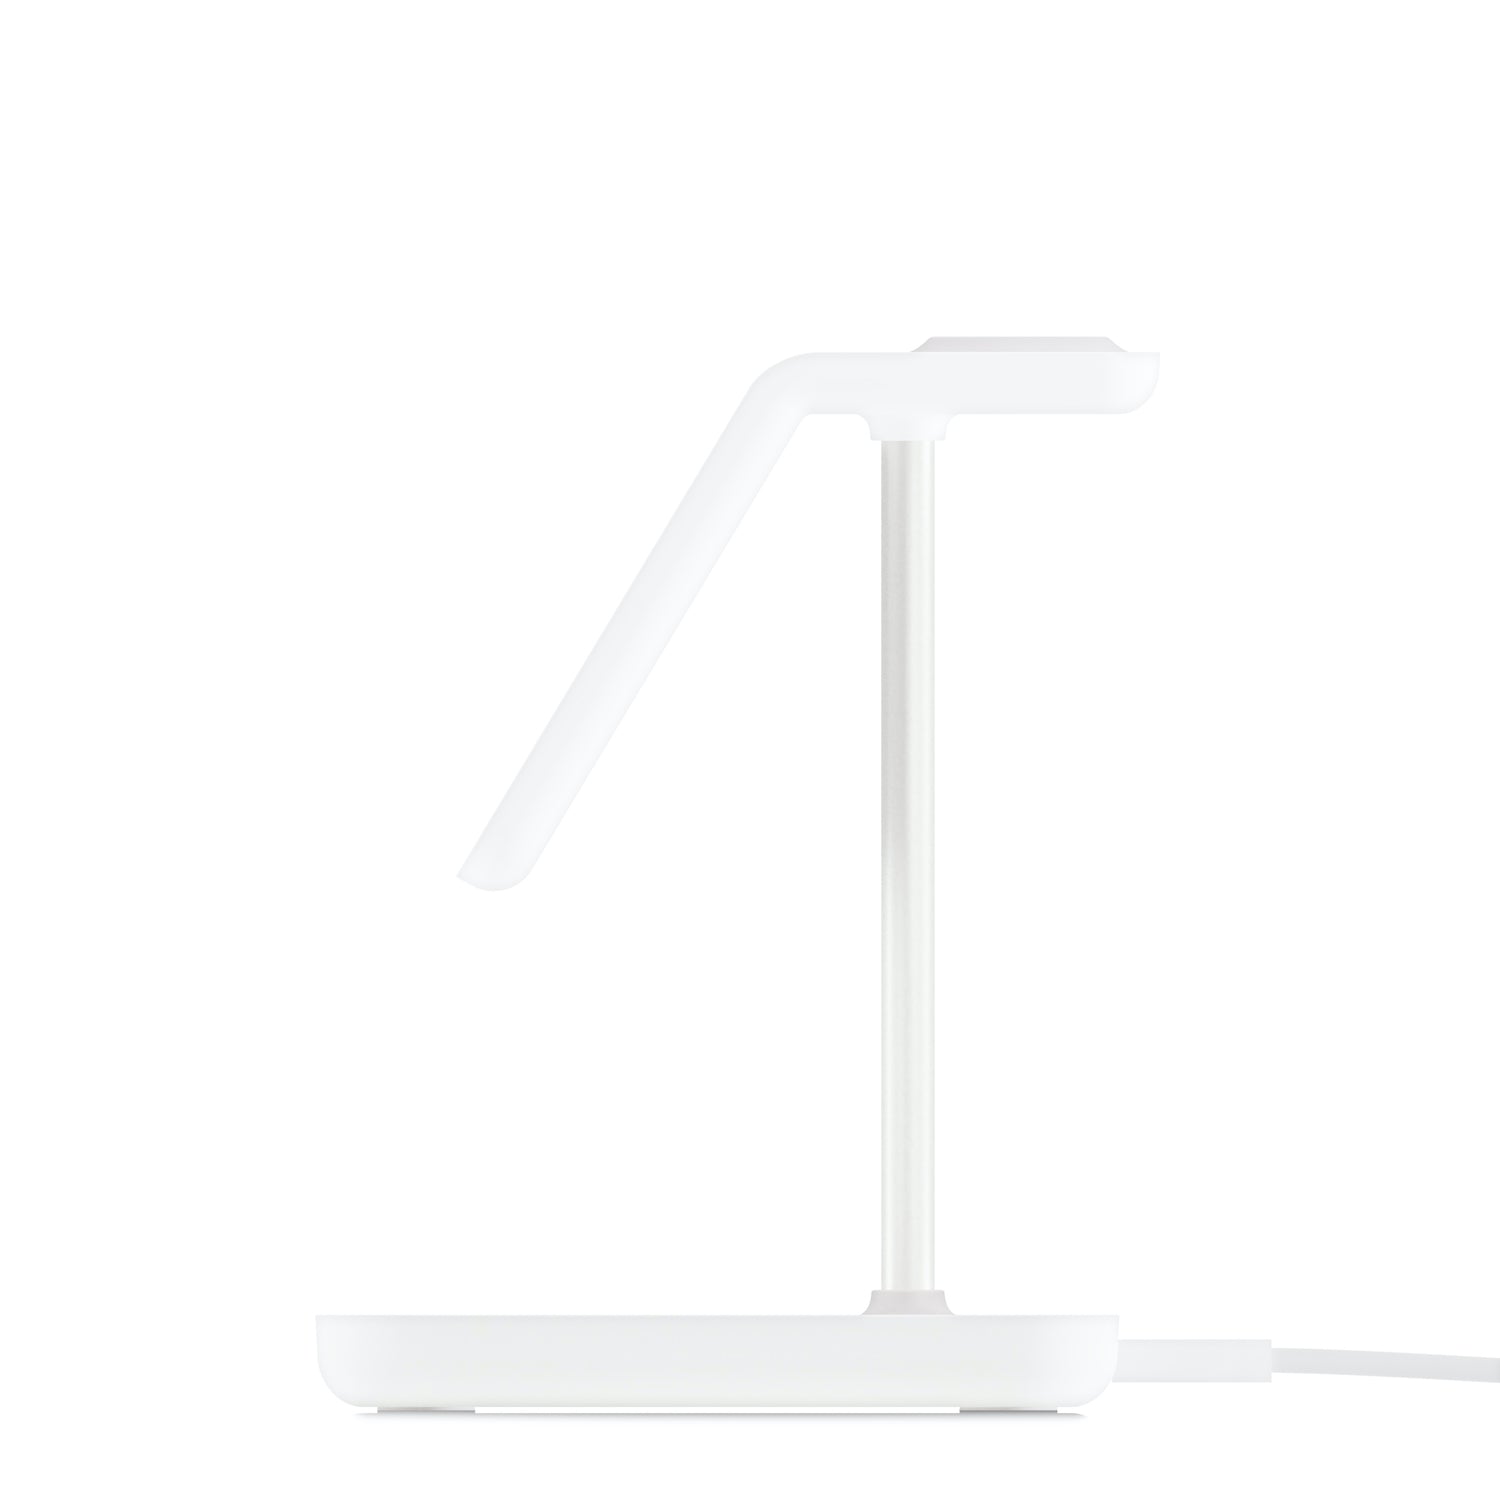 HiRise 3 desktop 3-in-1 charging stand - White